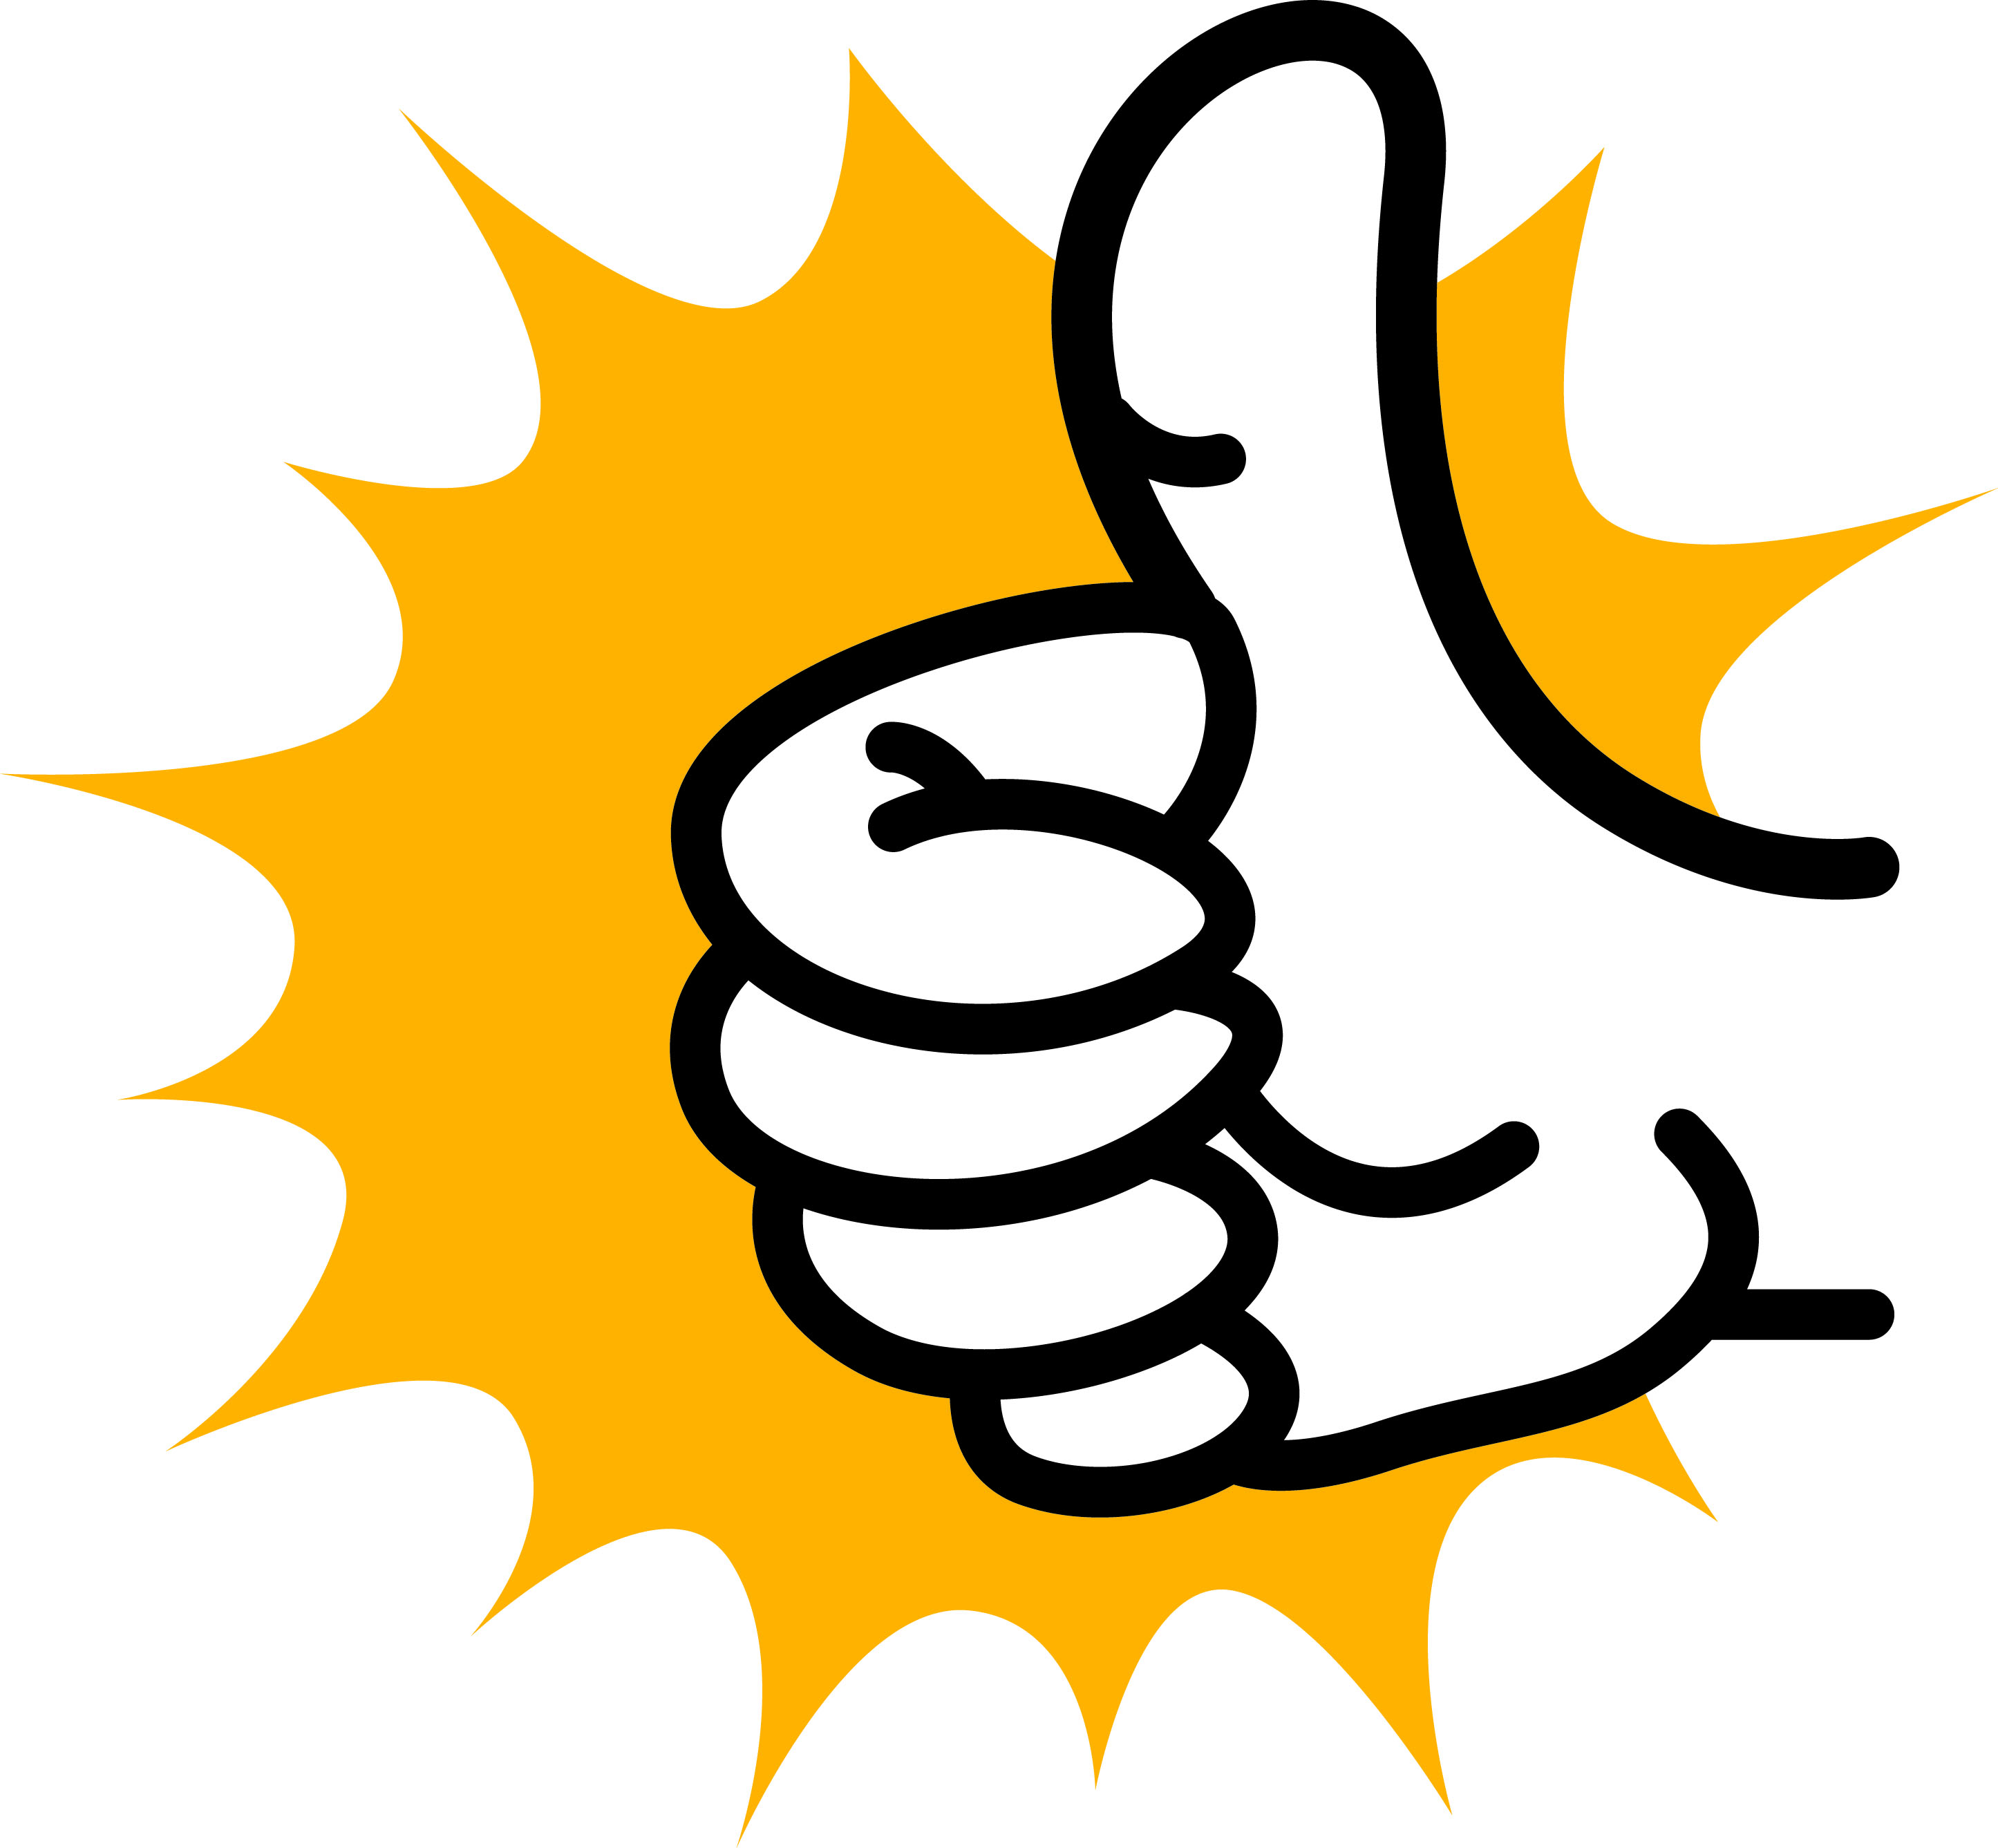 Clipart of thumbs up